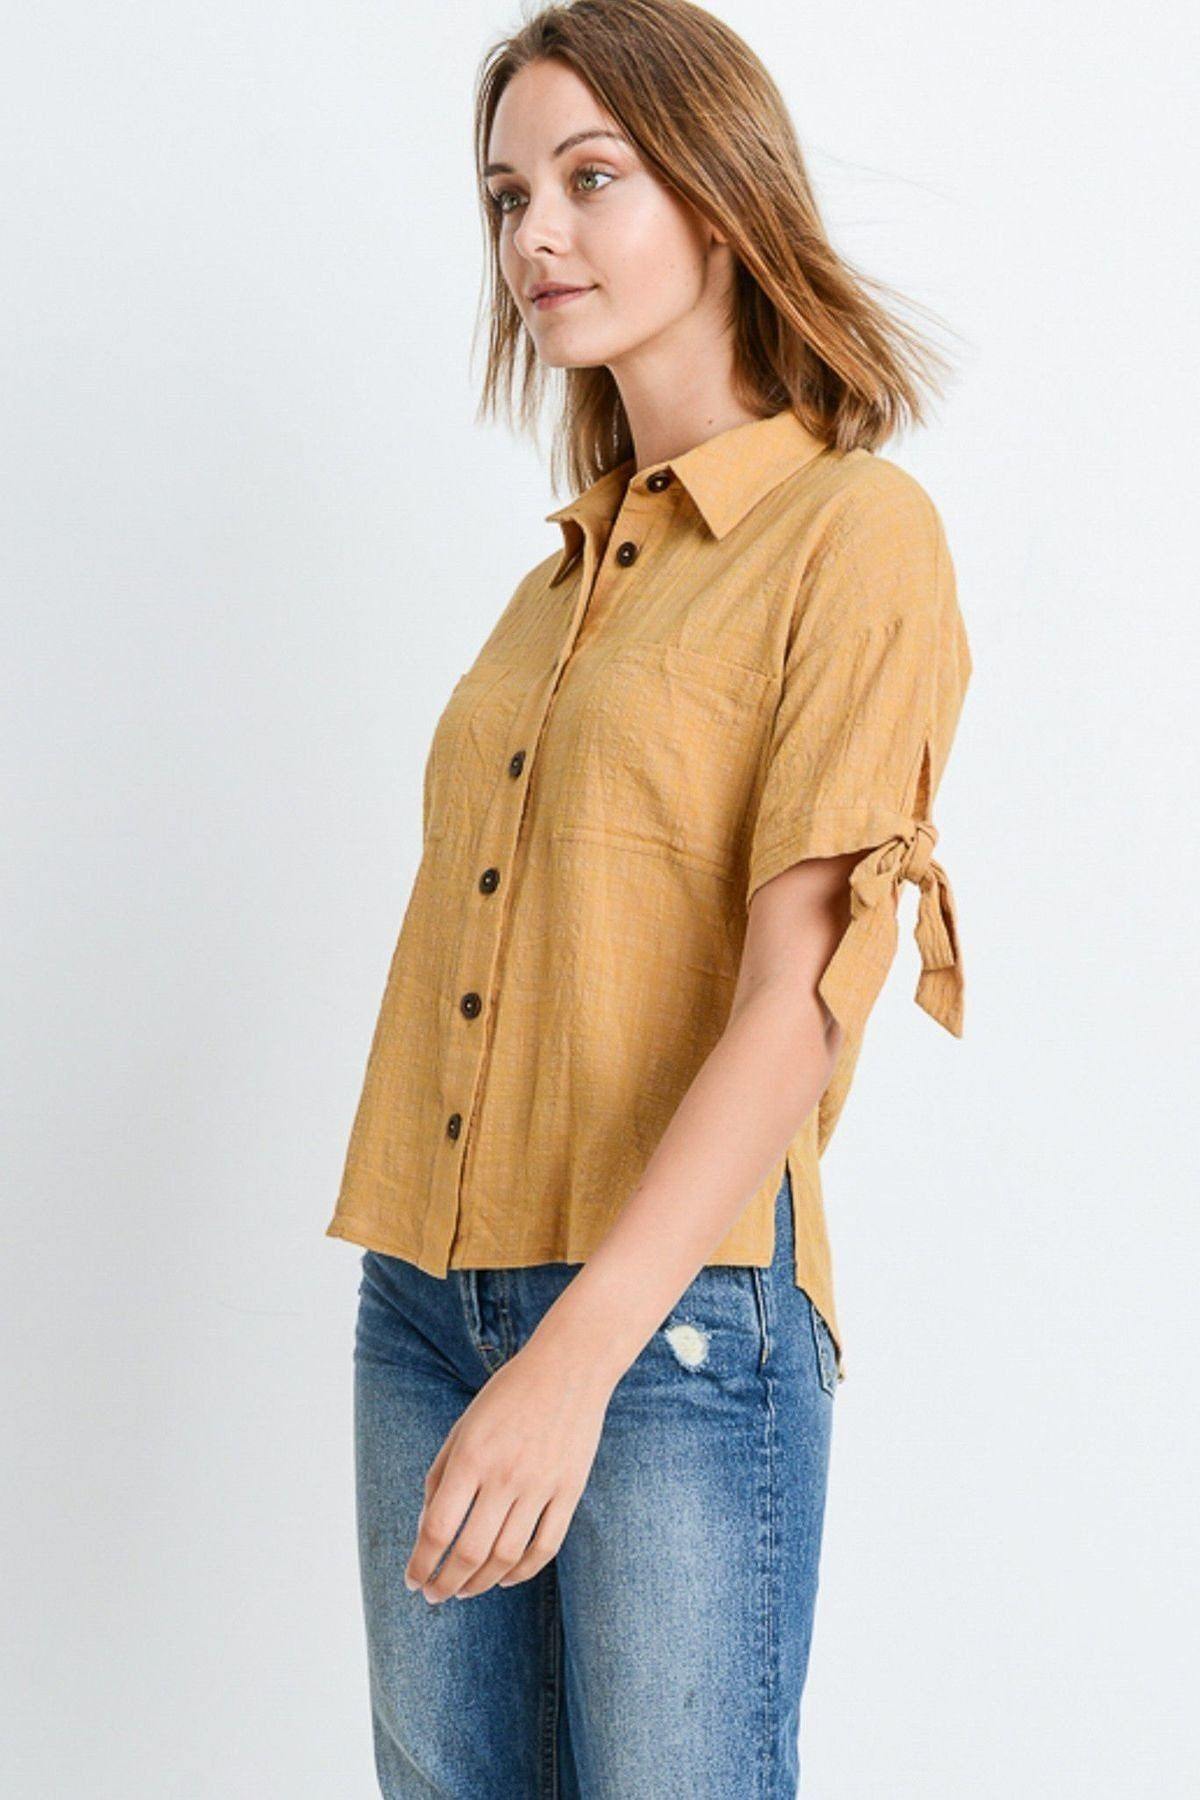 Short Sleeve Button Up Top With Tie Sleeve - Pearlara